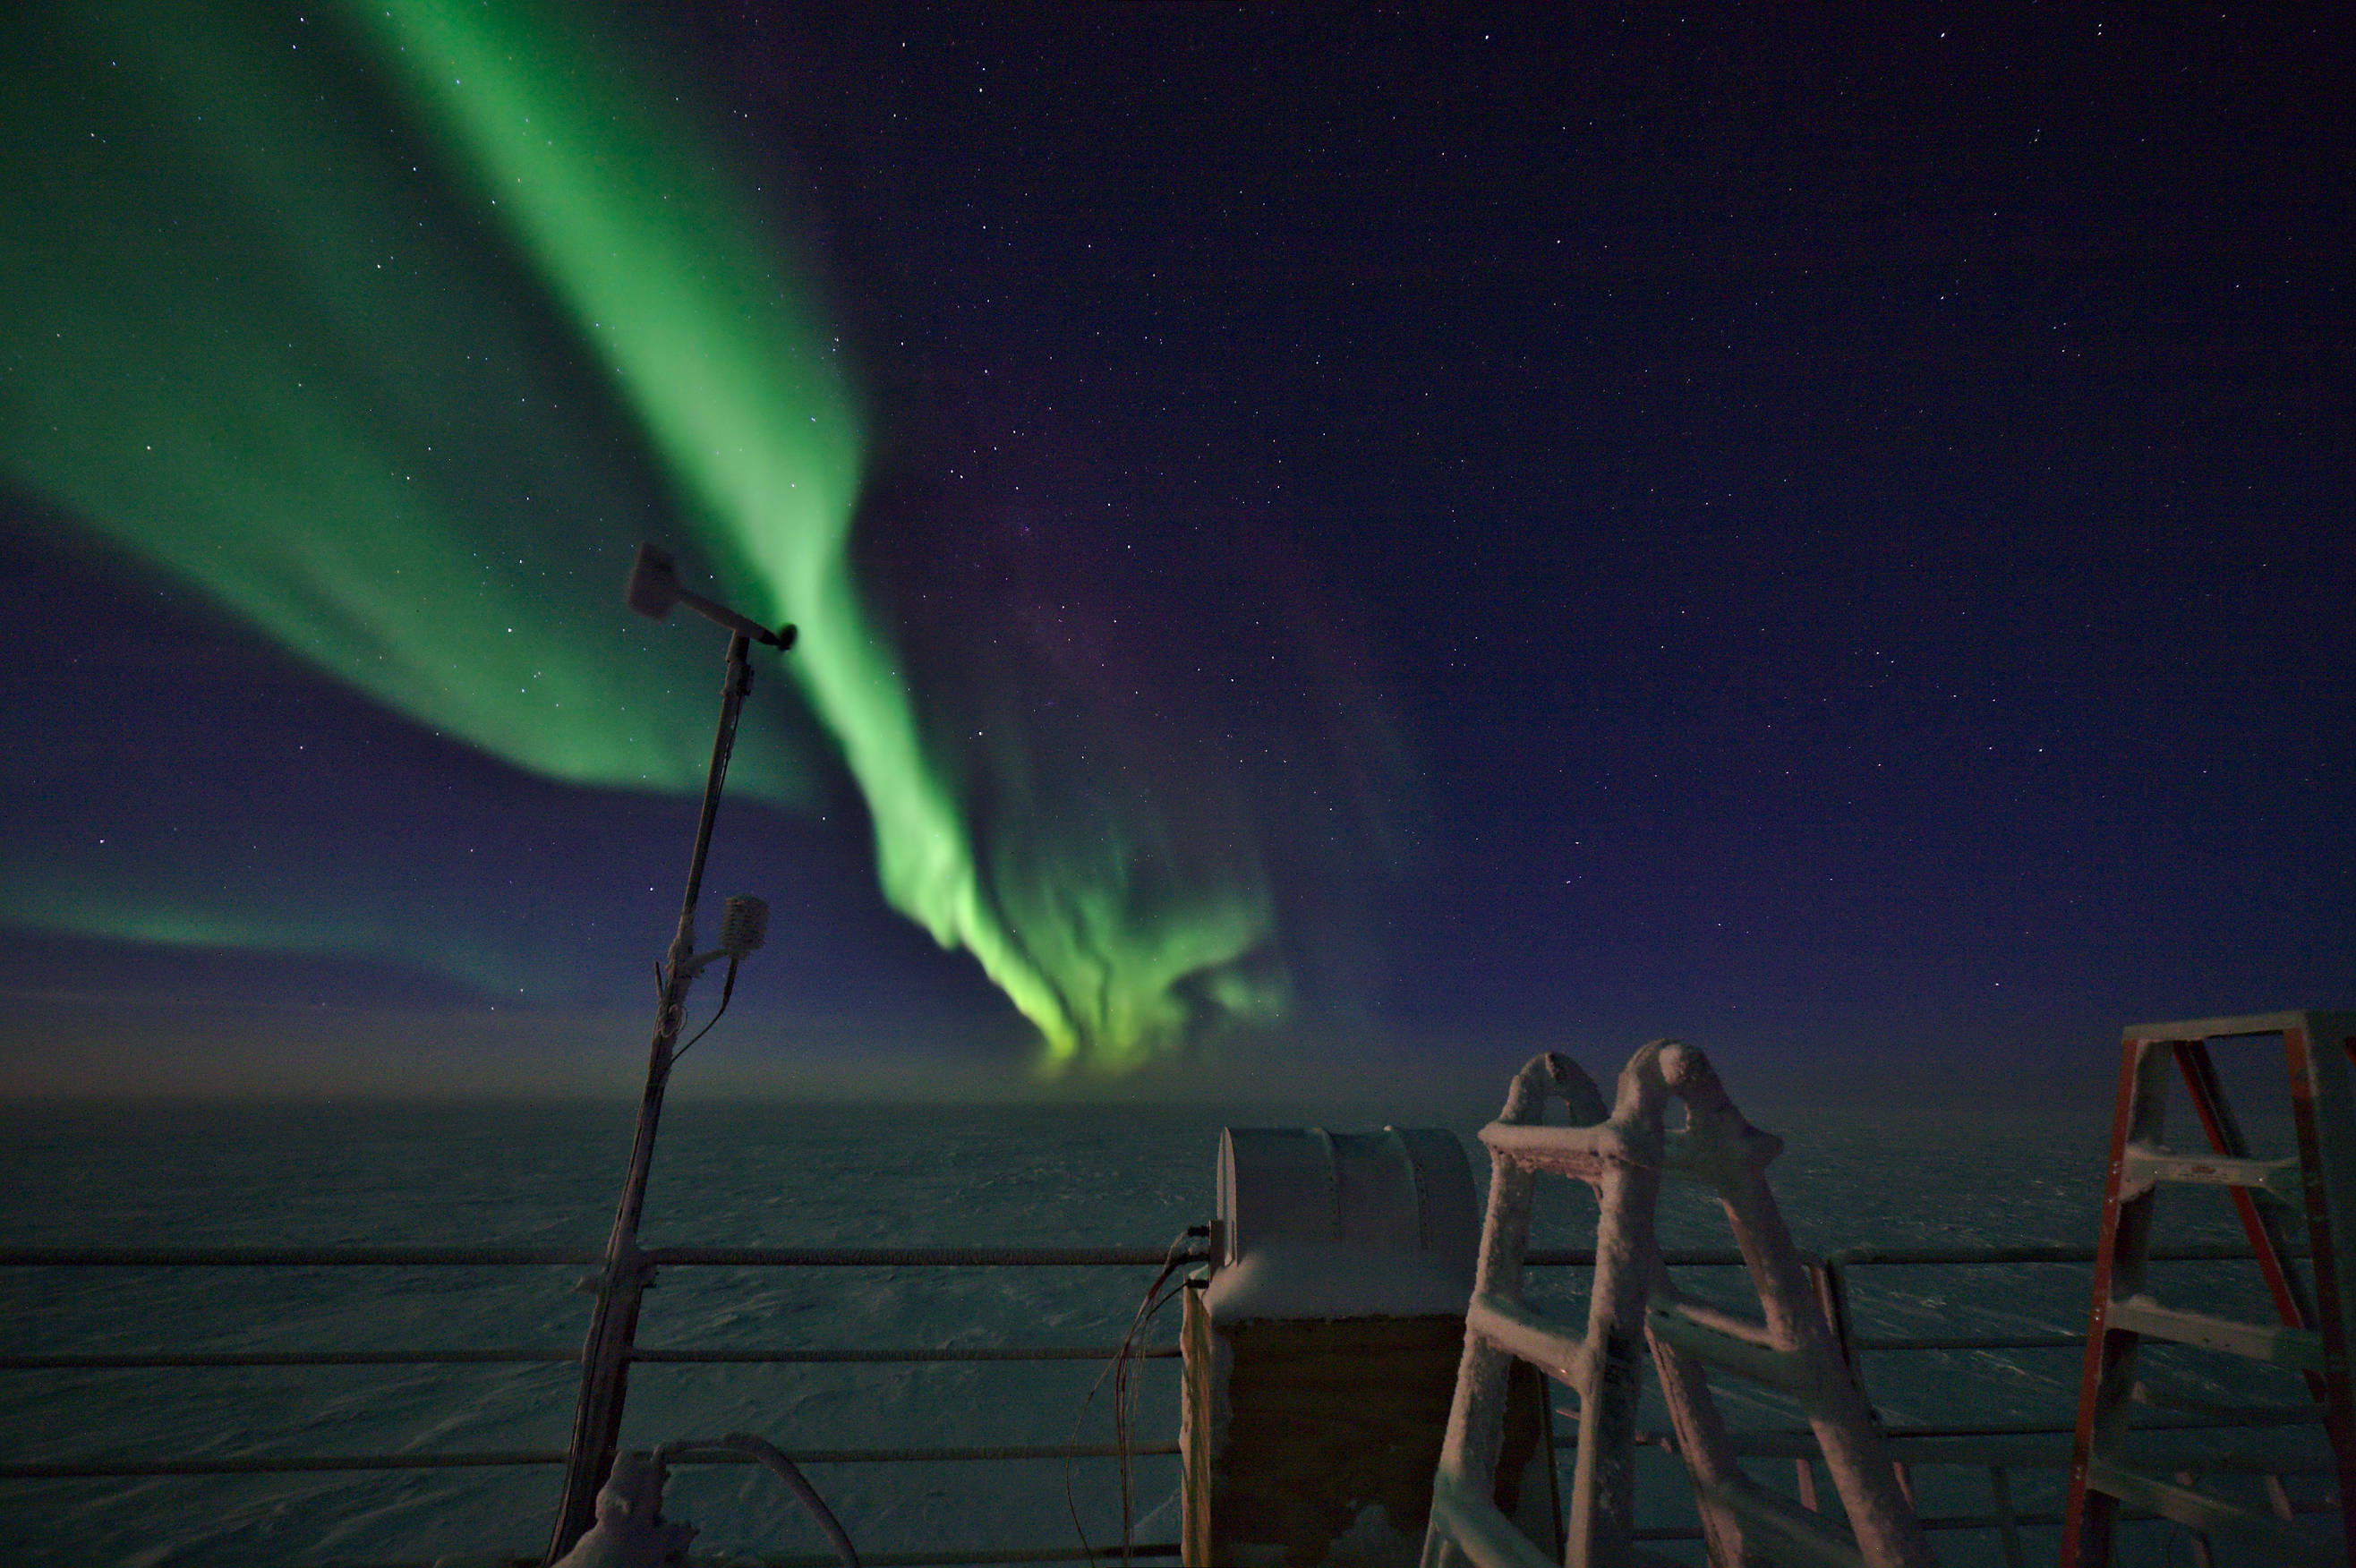 Strong auroras above the roof of the dark sector laboratory.  The light of the moon coming from the left illuminates the snow-covered ladder and the instruments of our weather station.